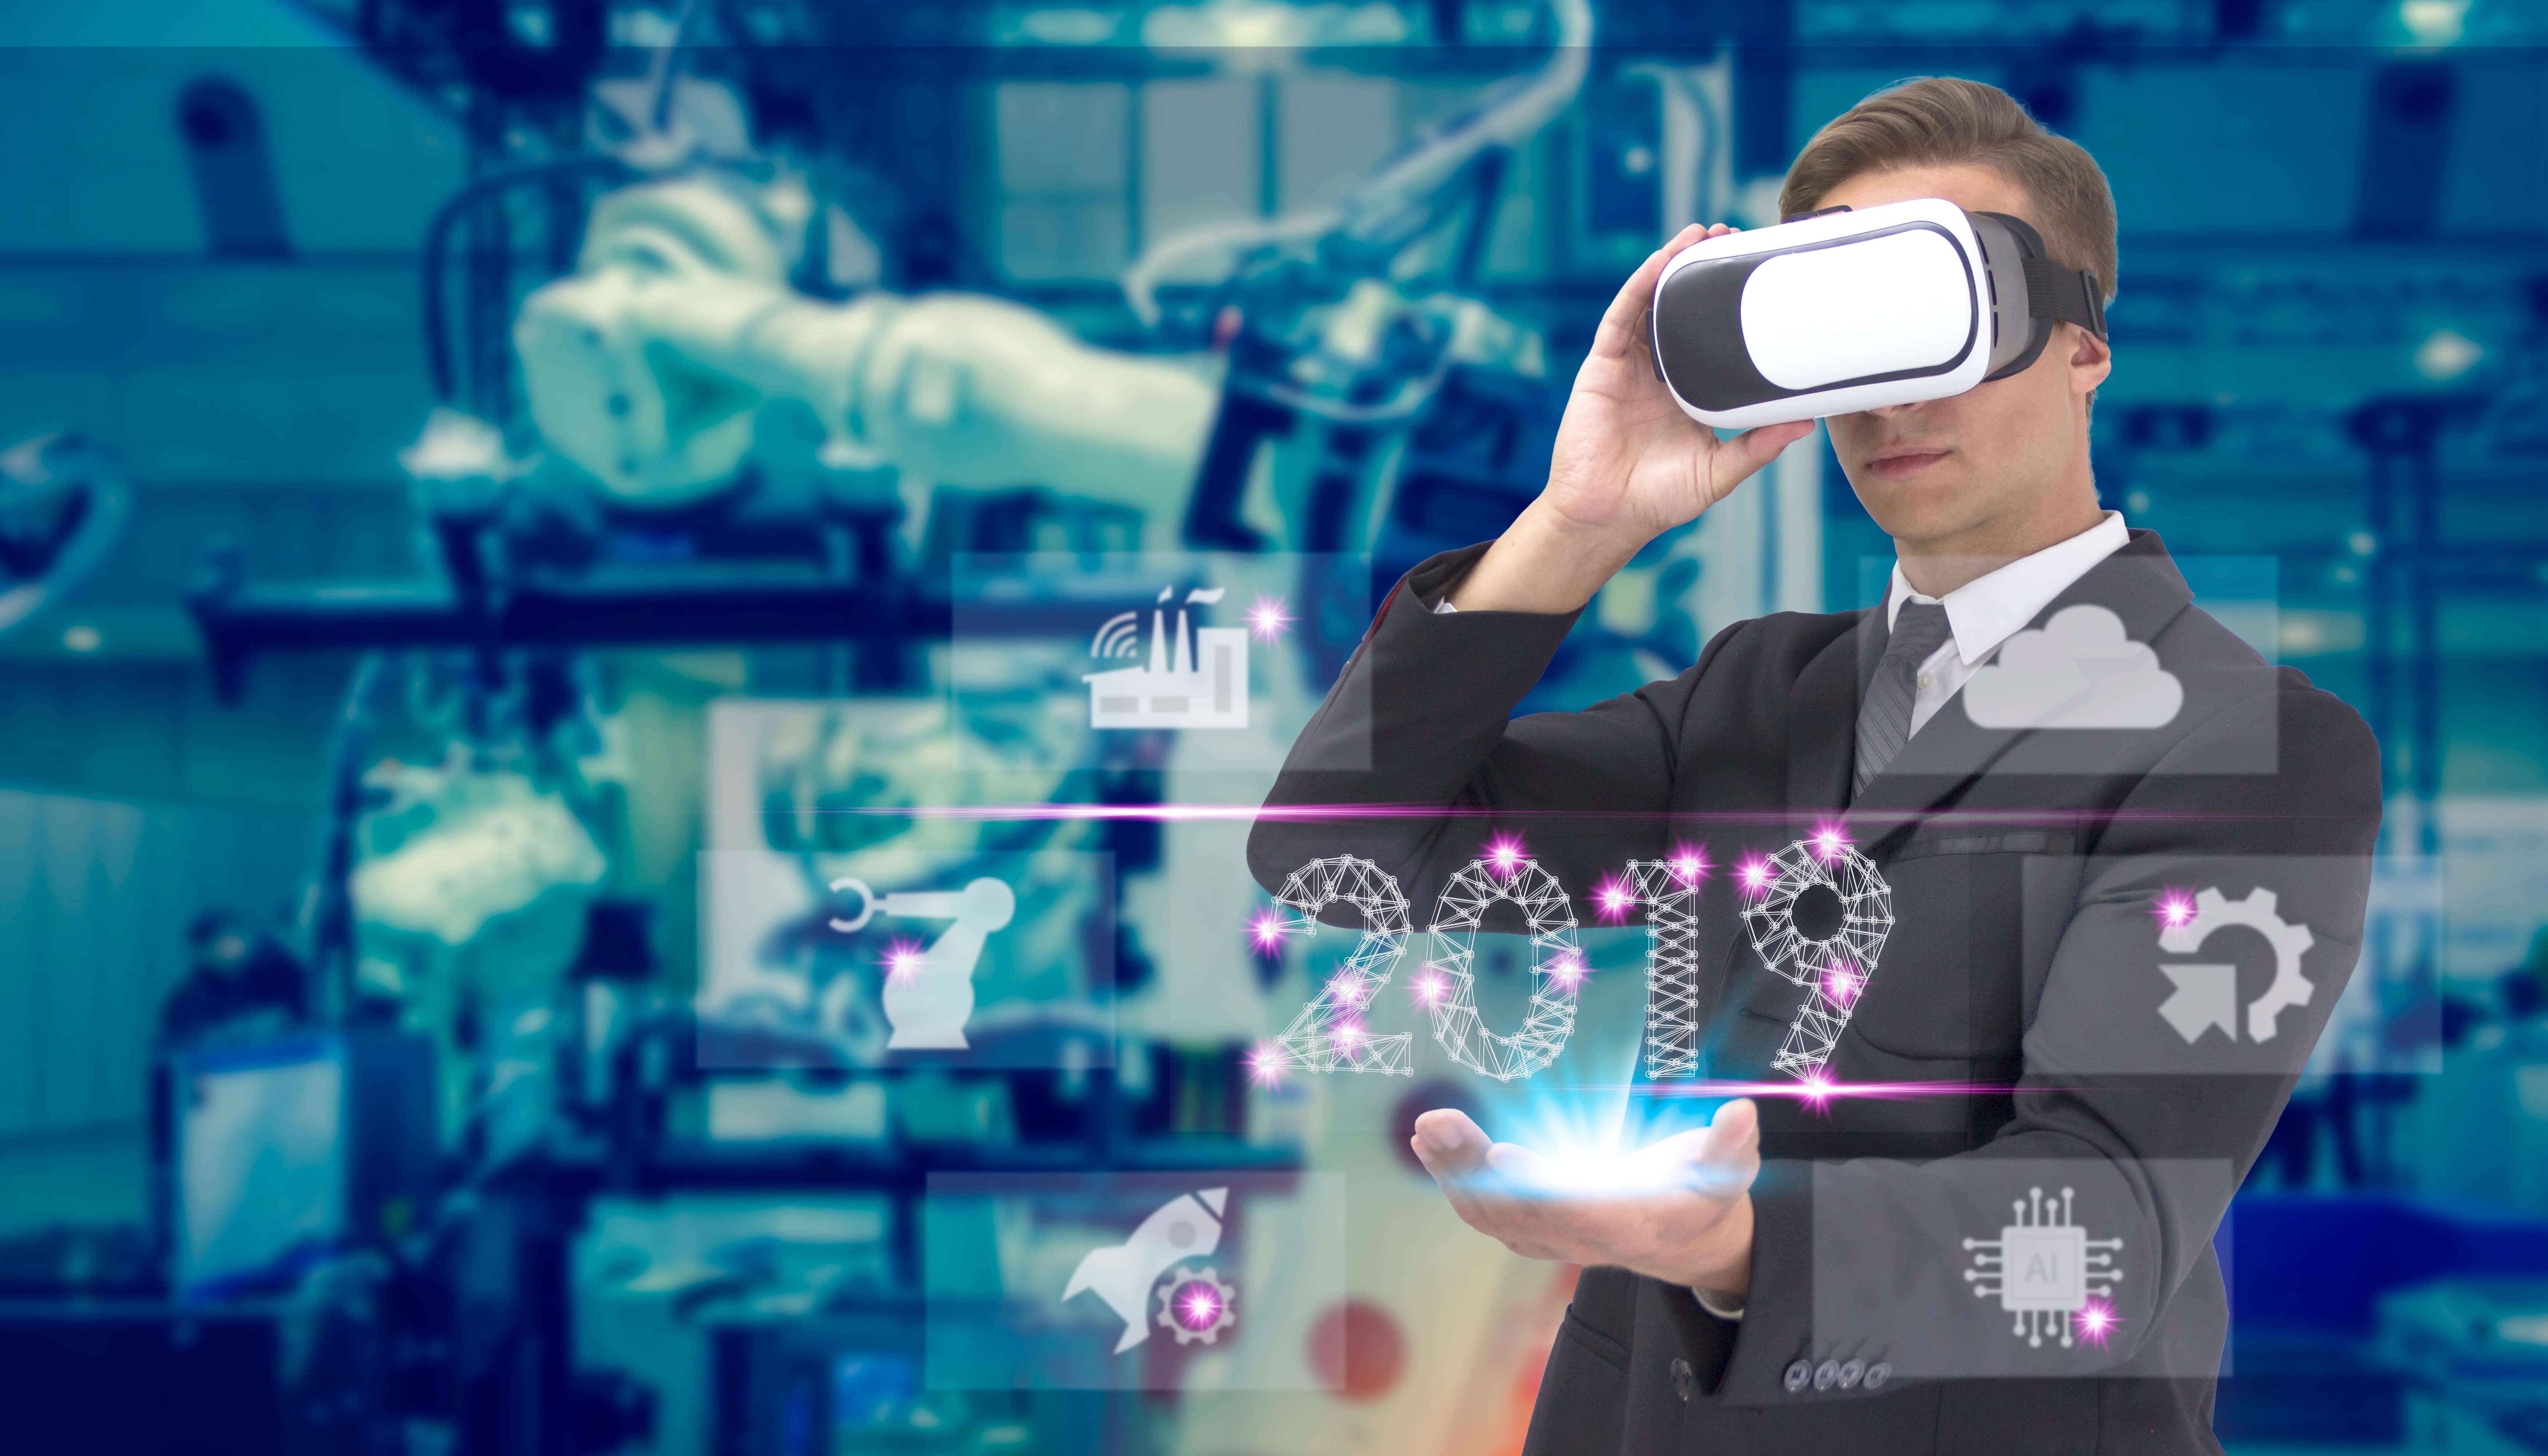 Manufacturing: What To Expect From Mixed Reality in 2019